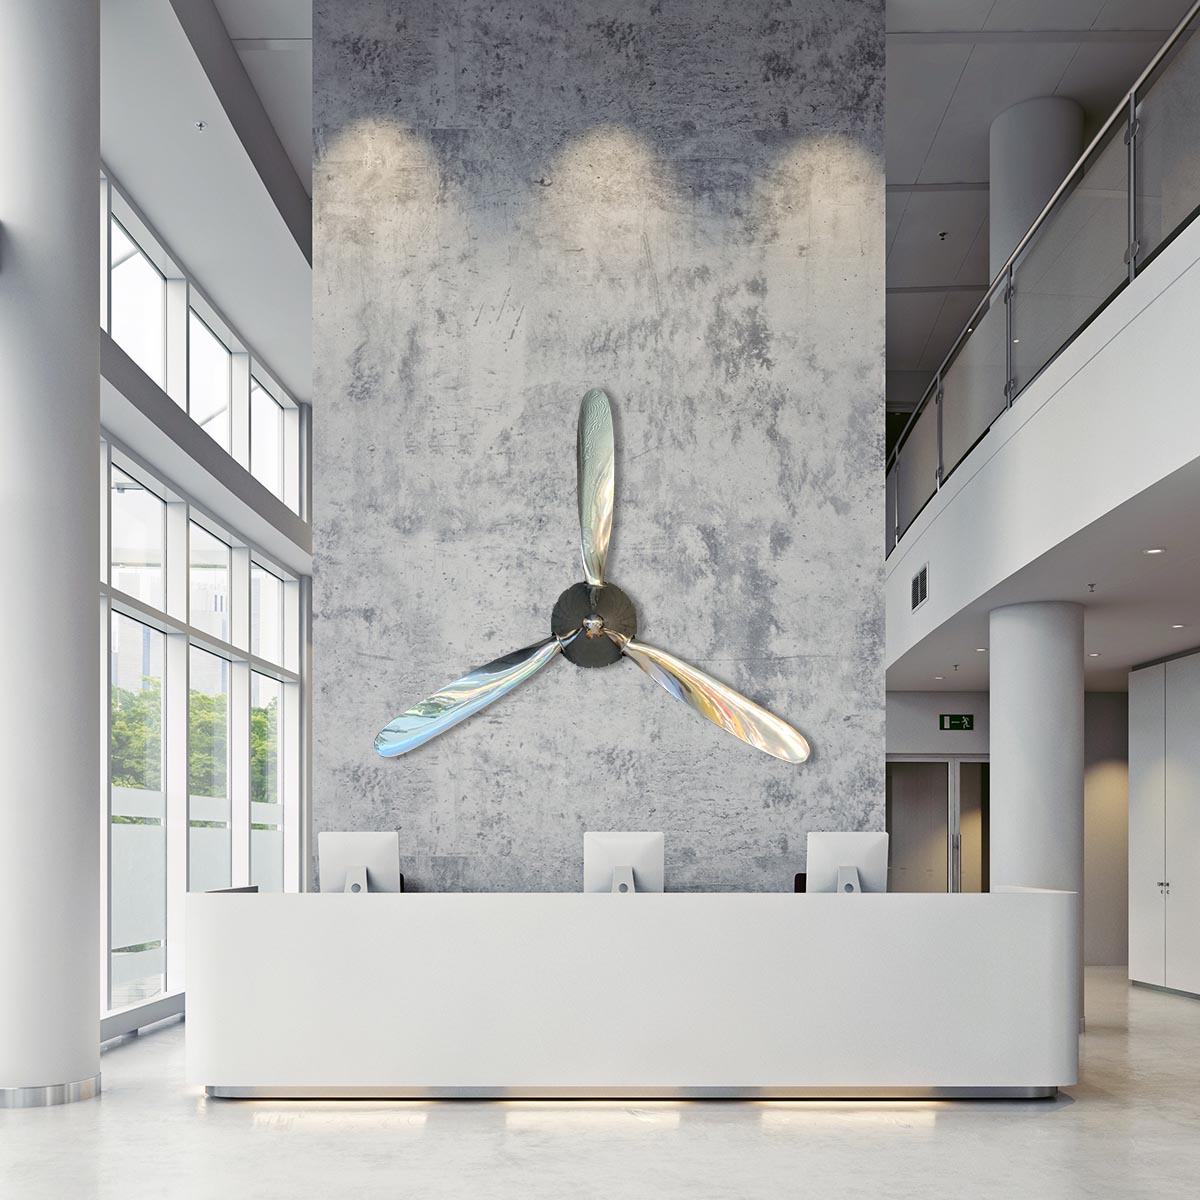 Polished three-bladed Hartzell propeller with spinner mounted on a wall in a modern business hall.